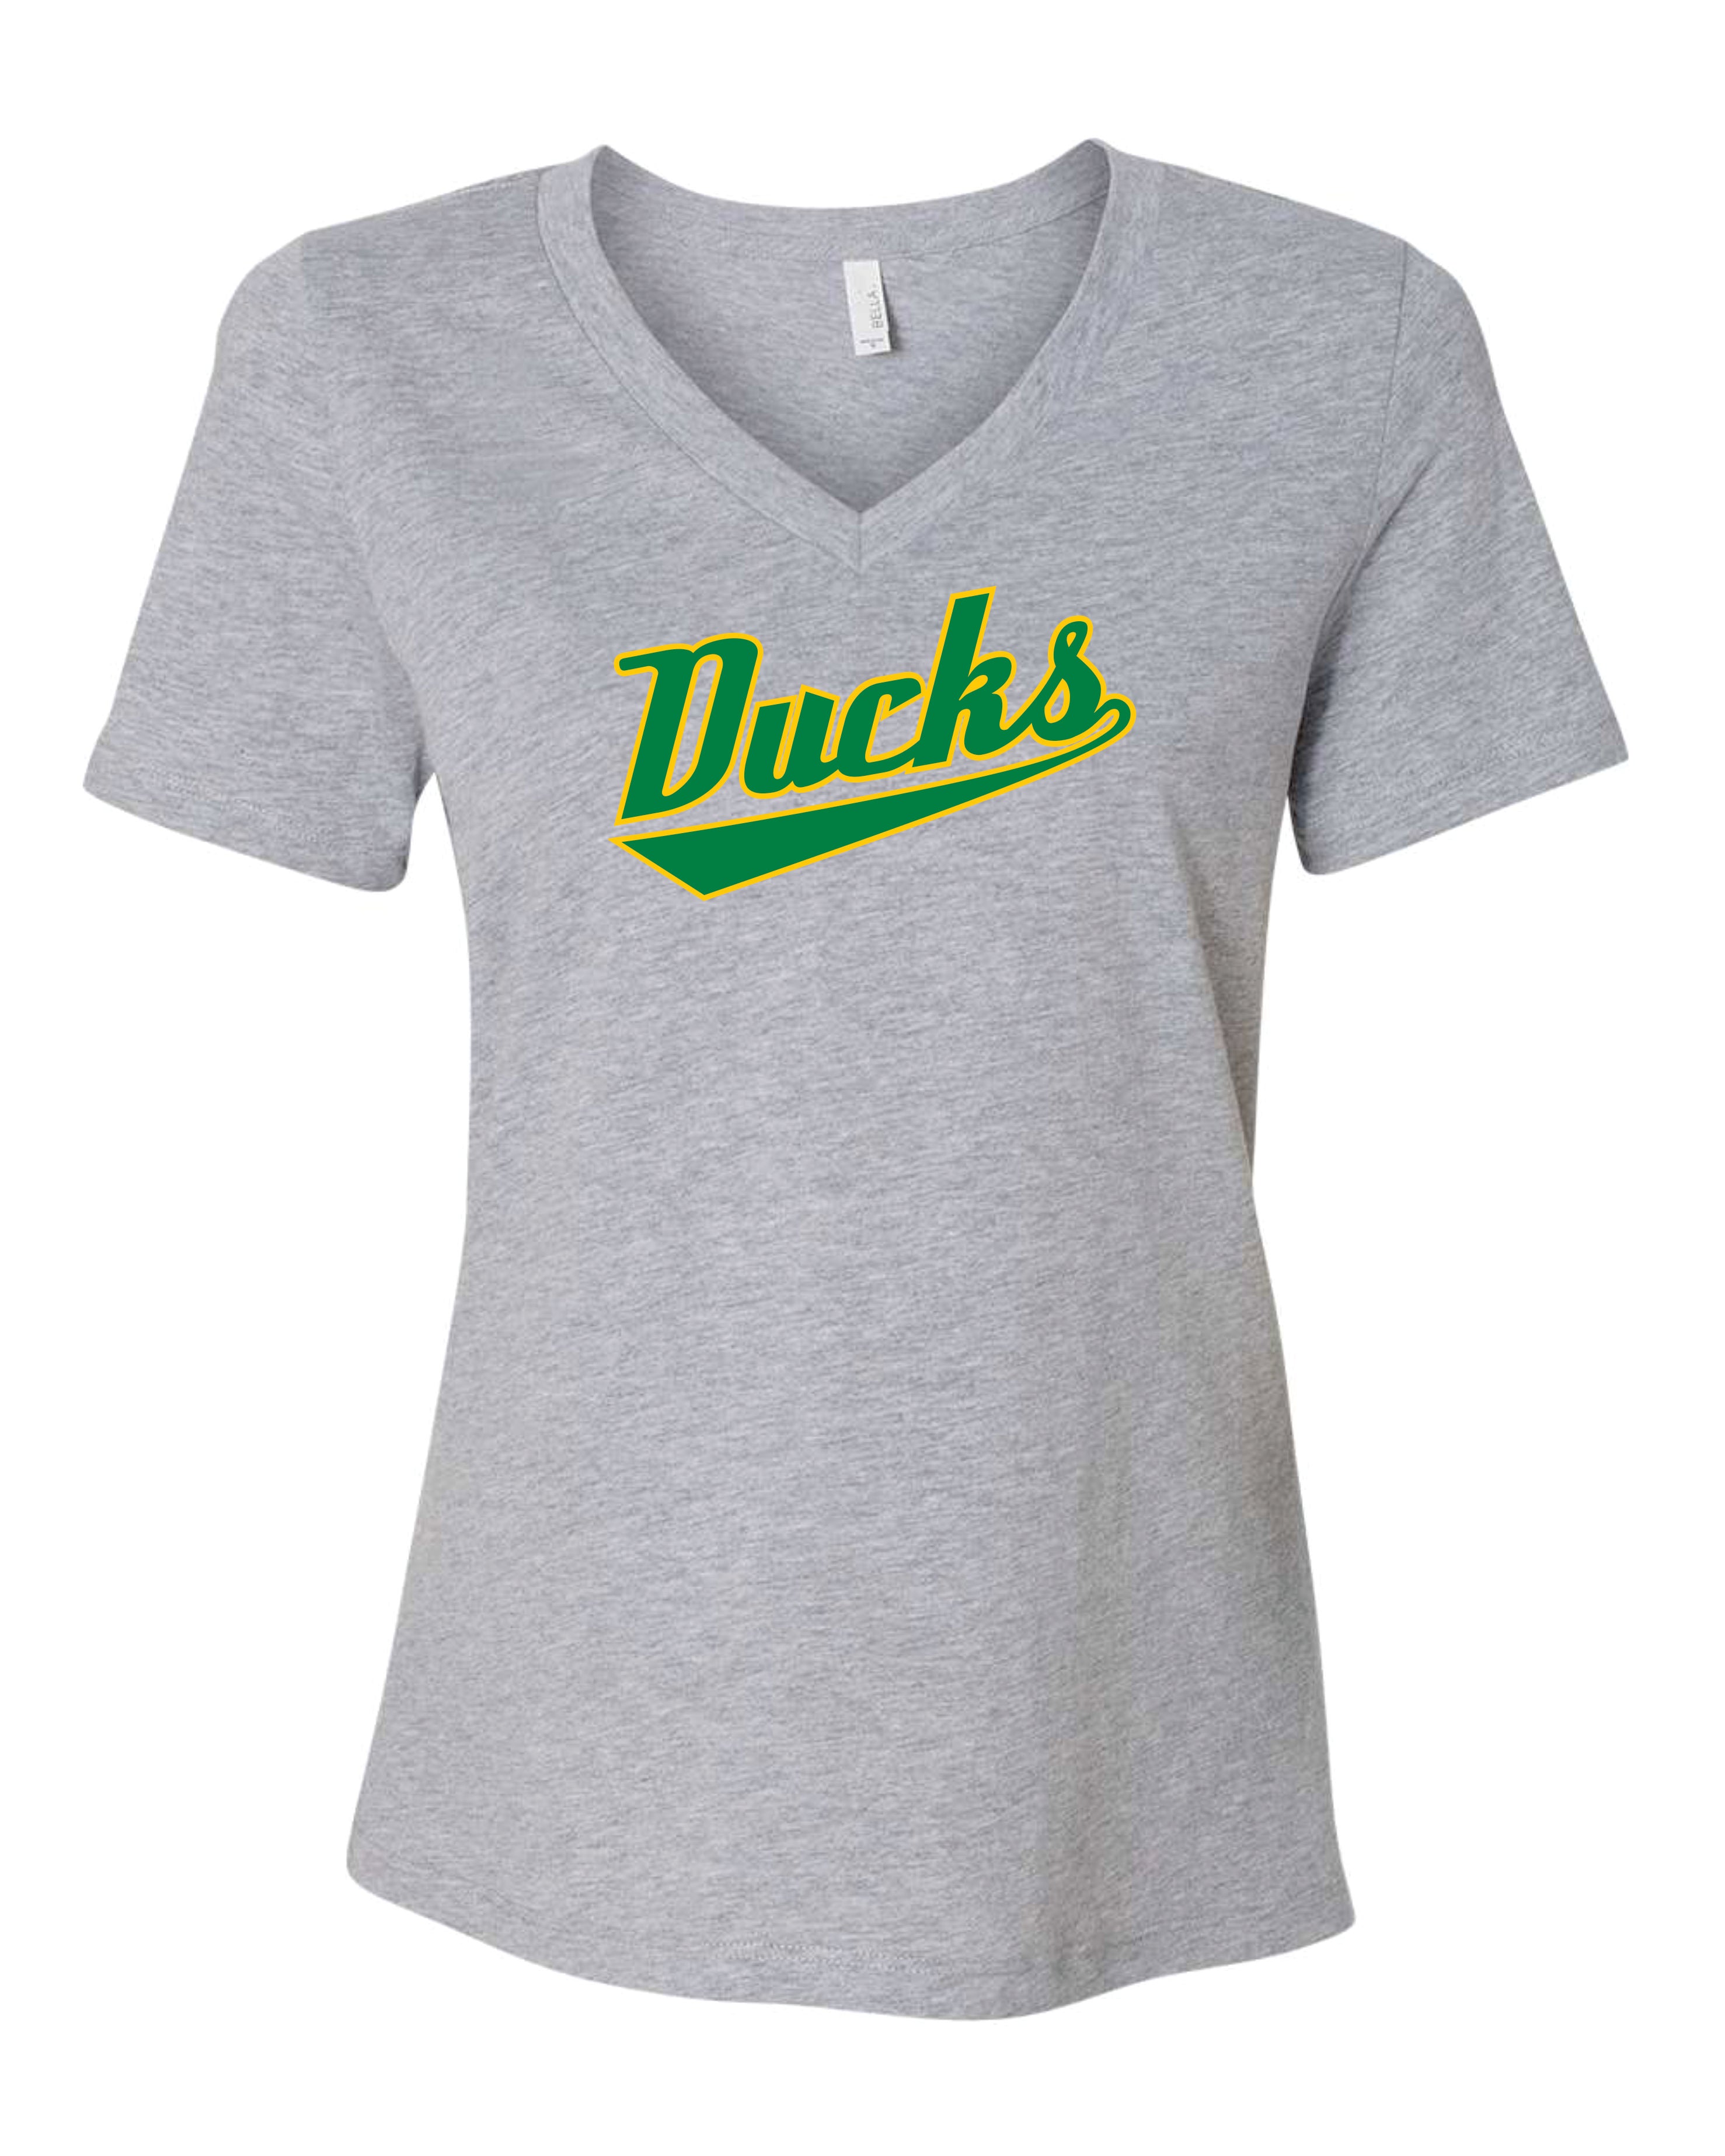 Ducks Women's Bella and Canvas Short Sleeve Relaxed Fit V-Neck